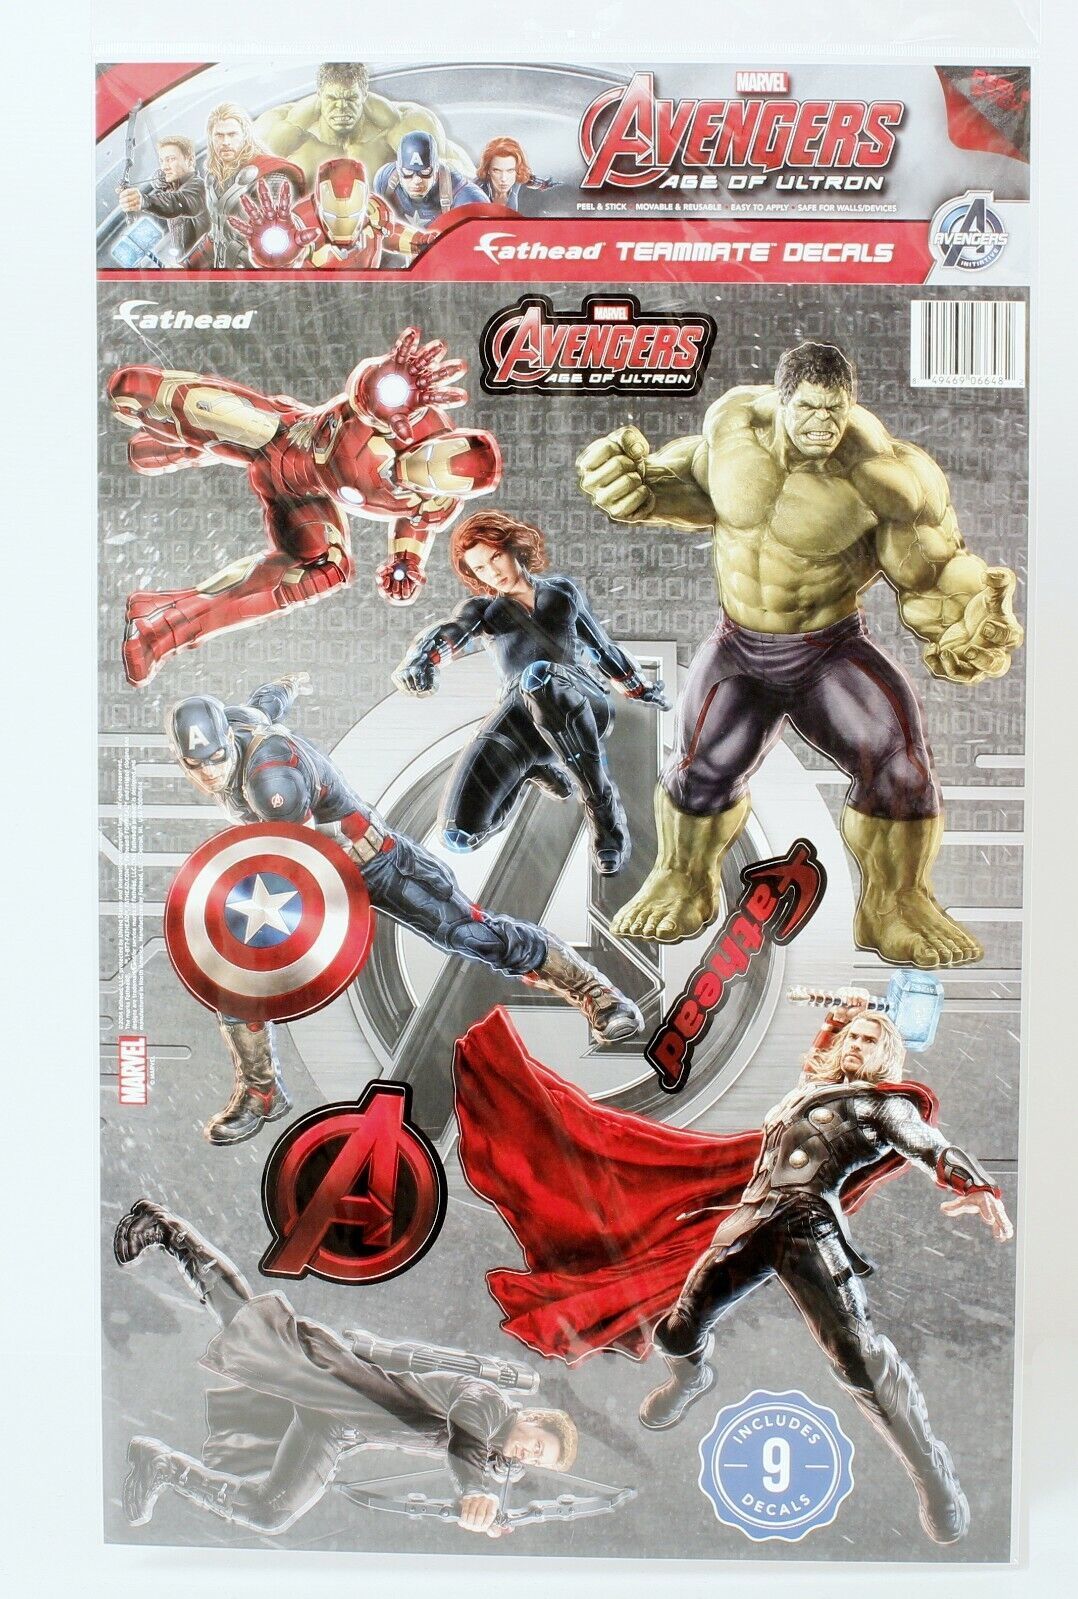 Avengers Age of Ultron Fathead Stickers Reusable Removable 9 Piece NEW - $9.31